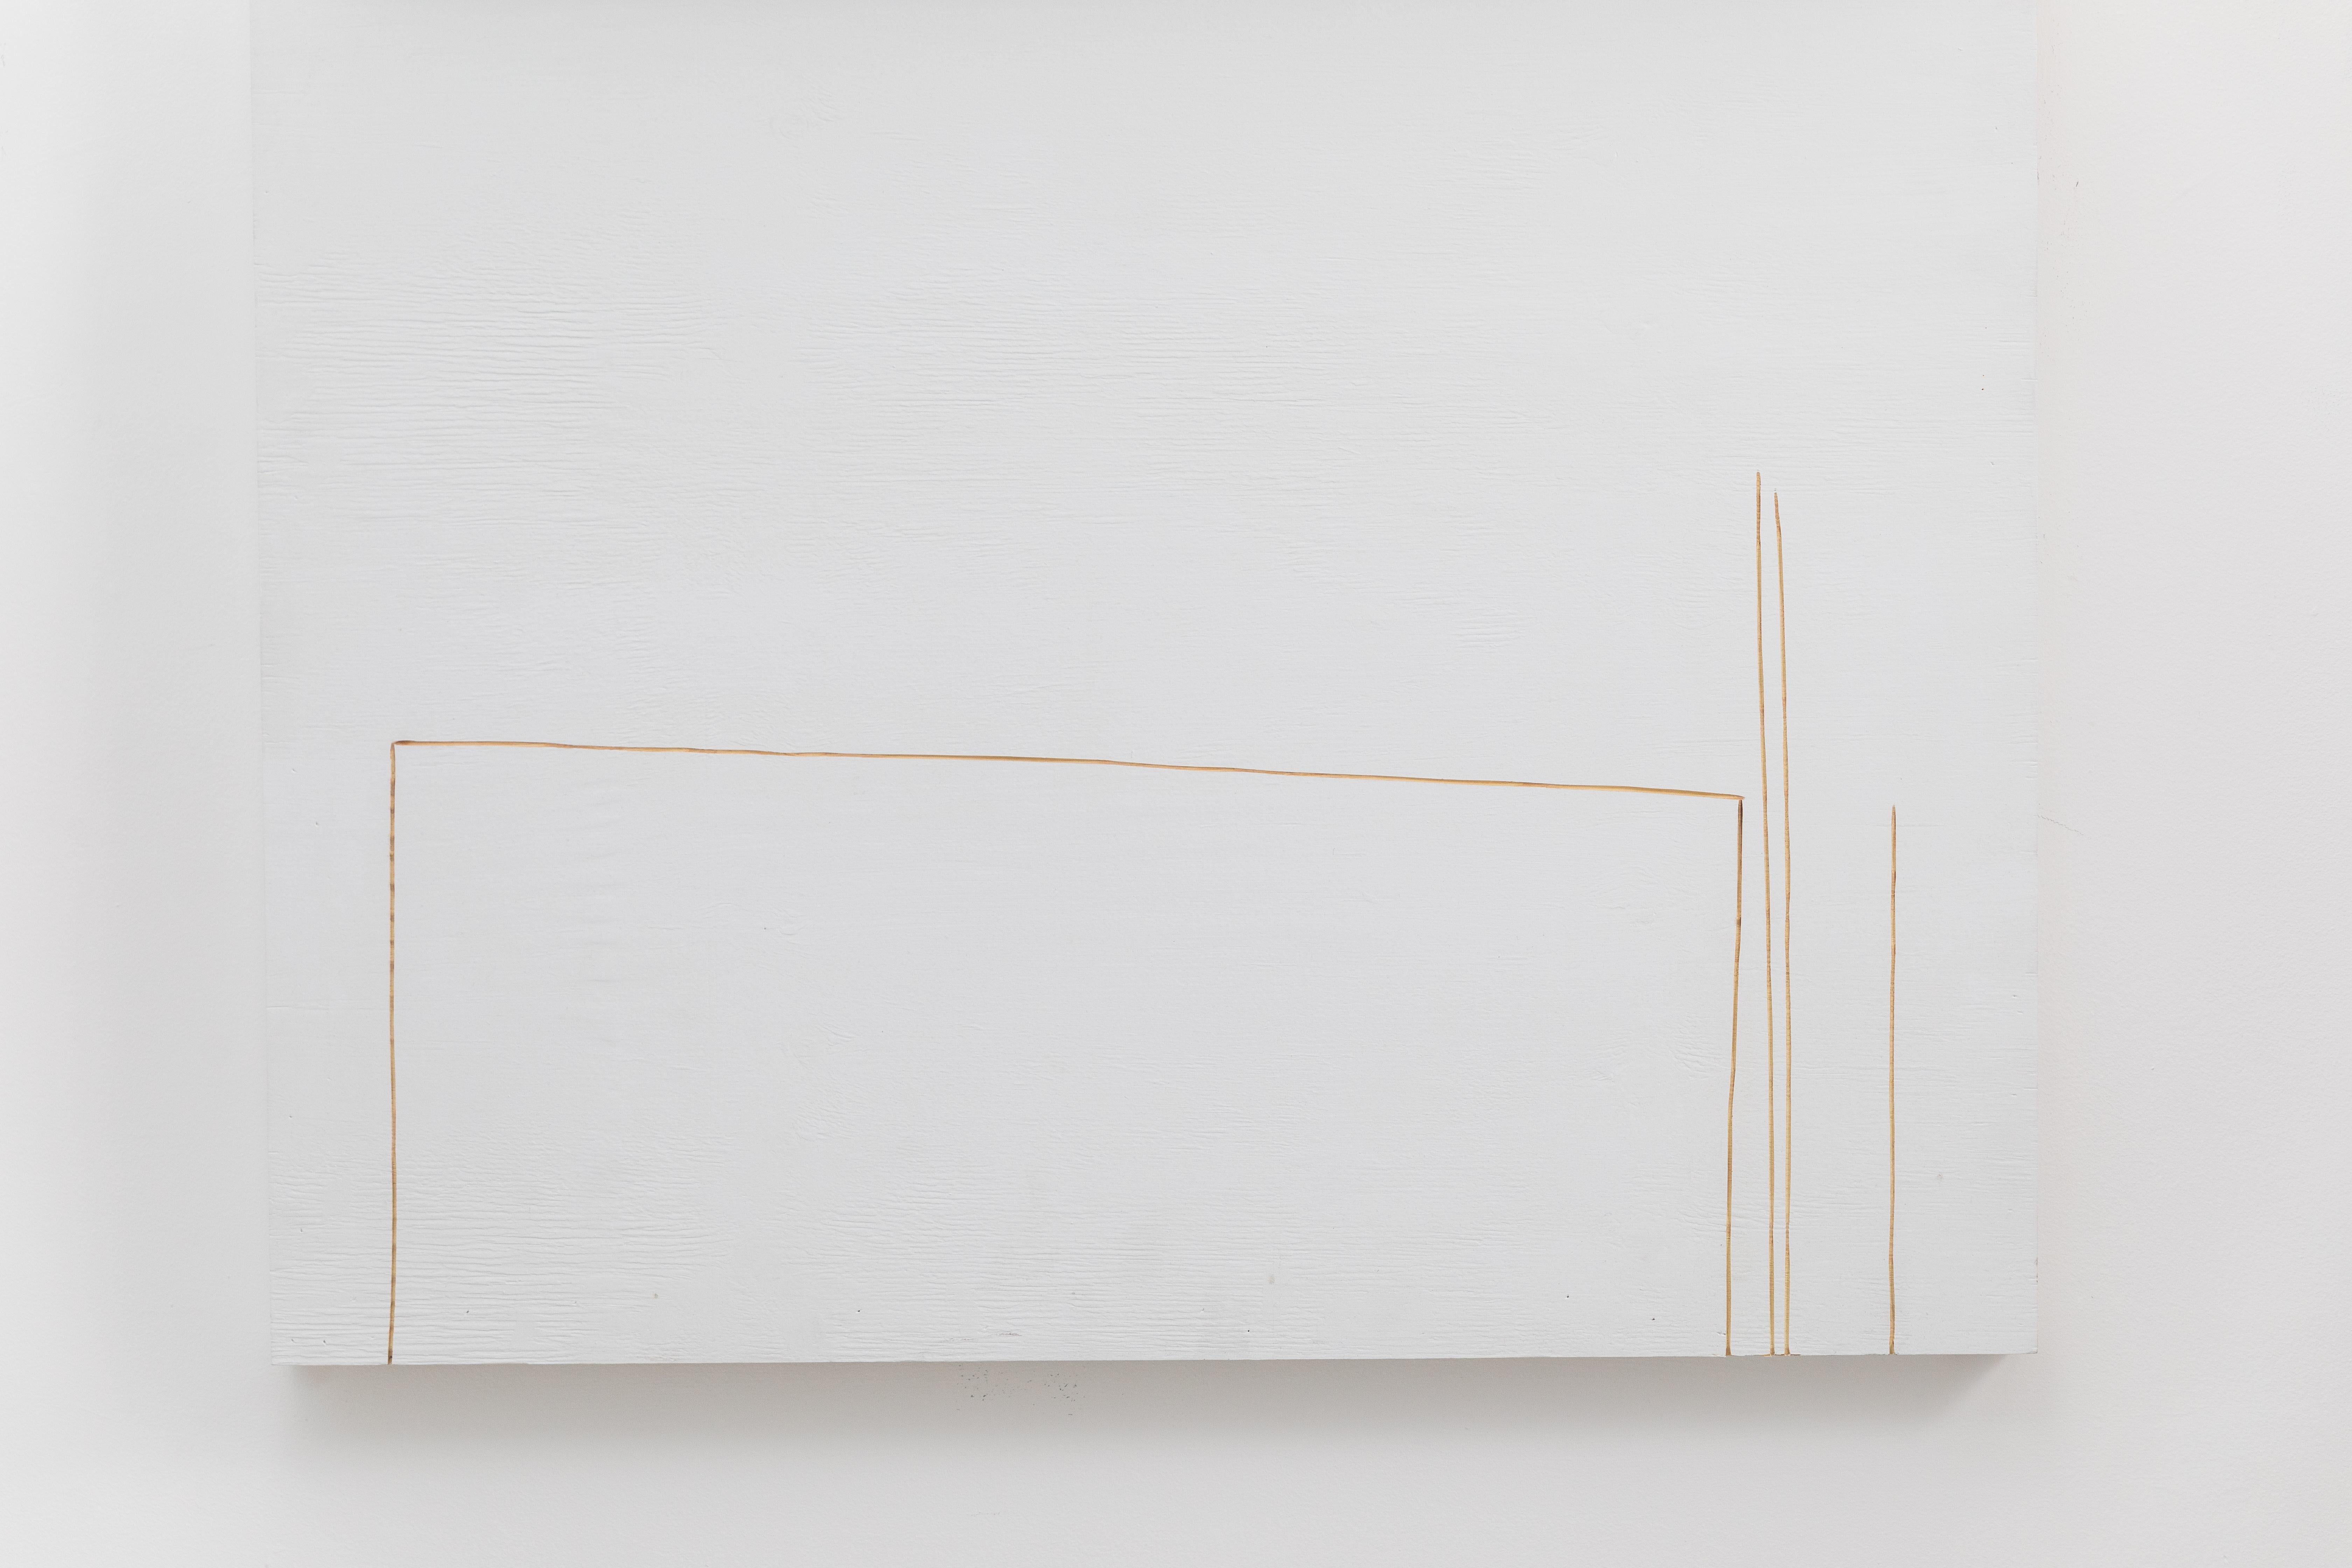 Rurak’s Portland white paintings have a Minimalist confidence. Simple white boards are impulsively etched with groups of lines and forms familiar in his lexicon of imagery. The etching, which also appears in his Steel Paintings and much of his